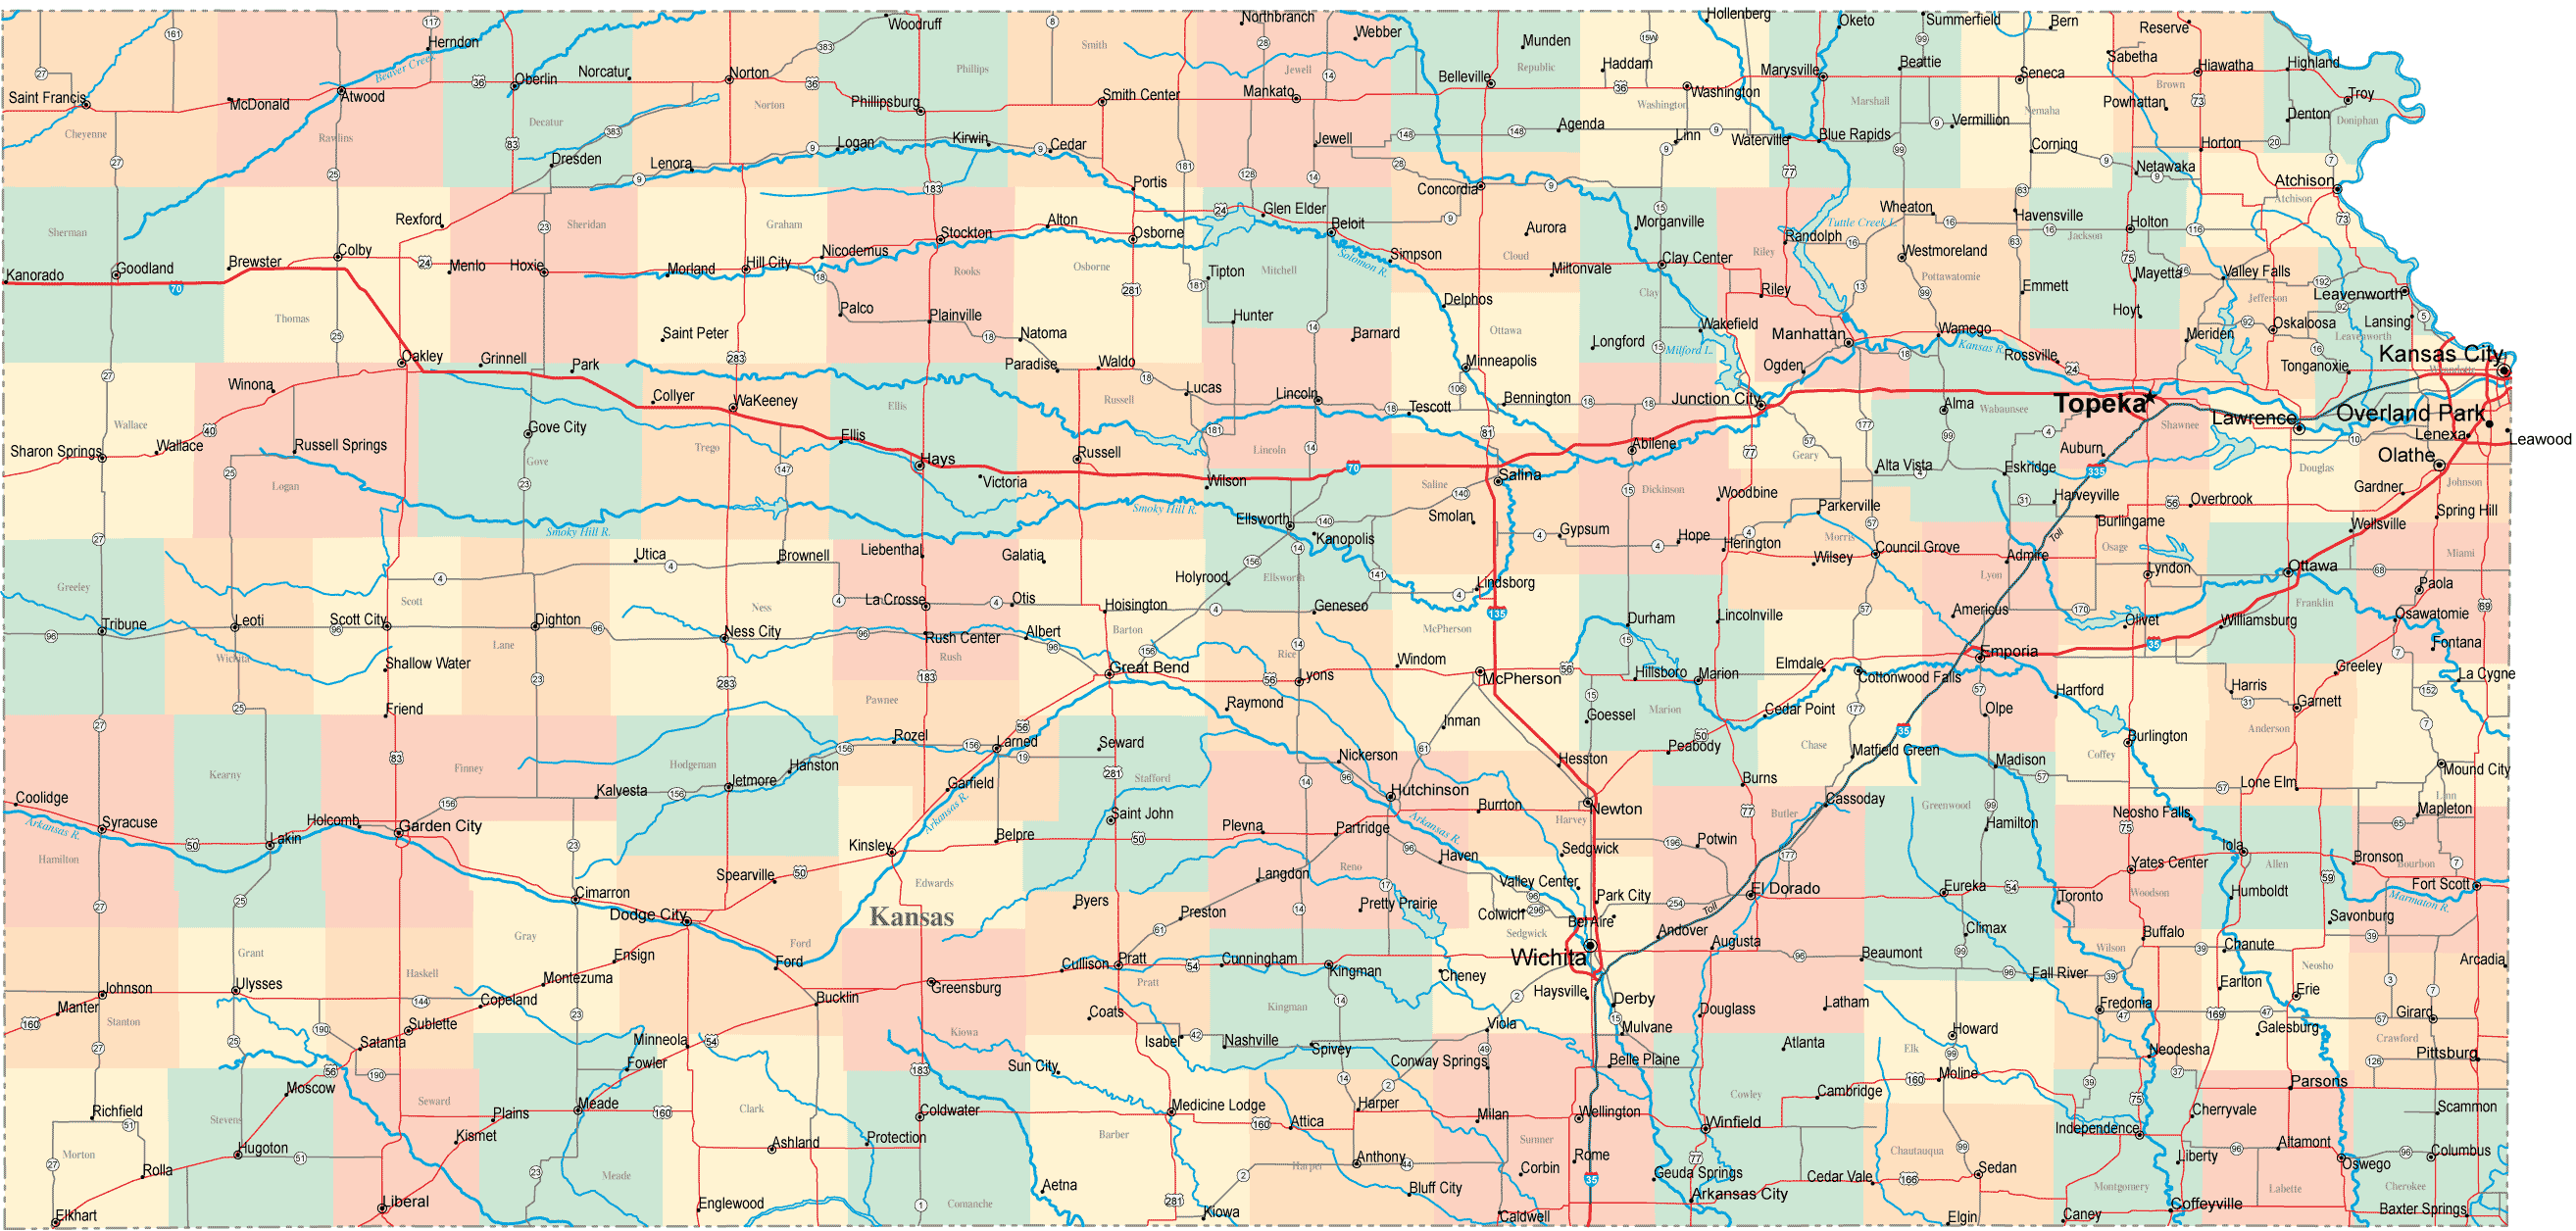 Kansas Map With Cities And Towns - Blondy Sidonnie